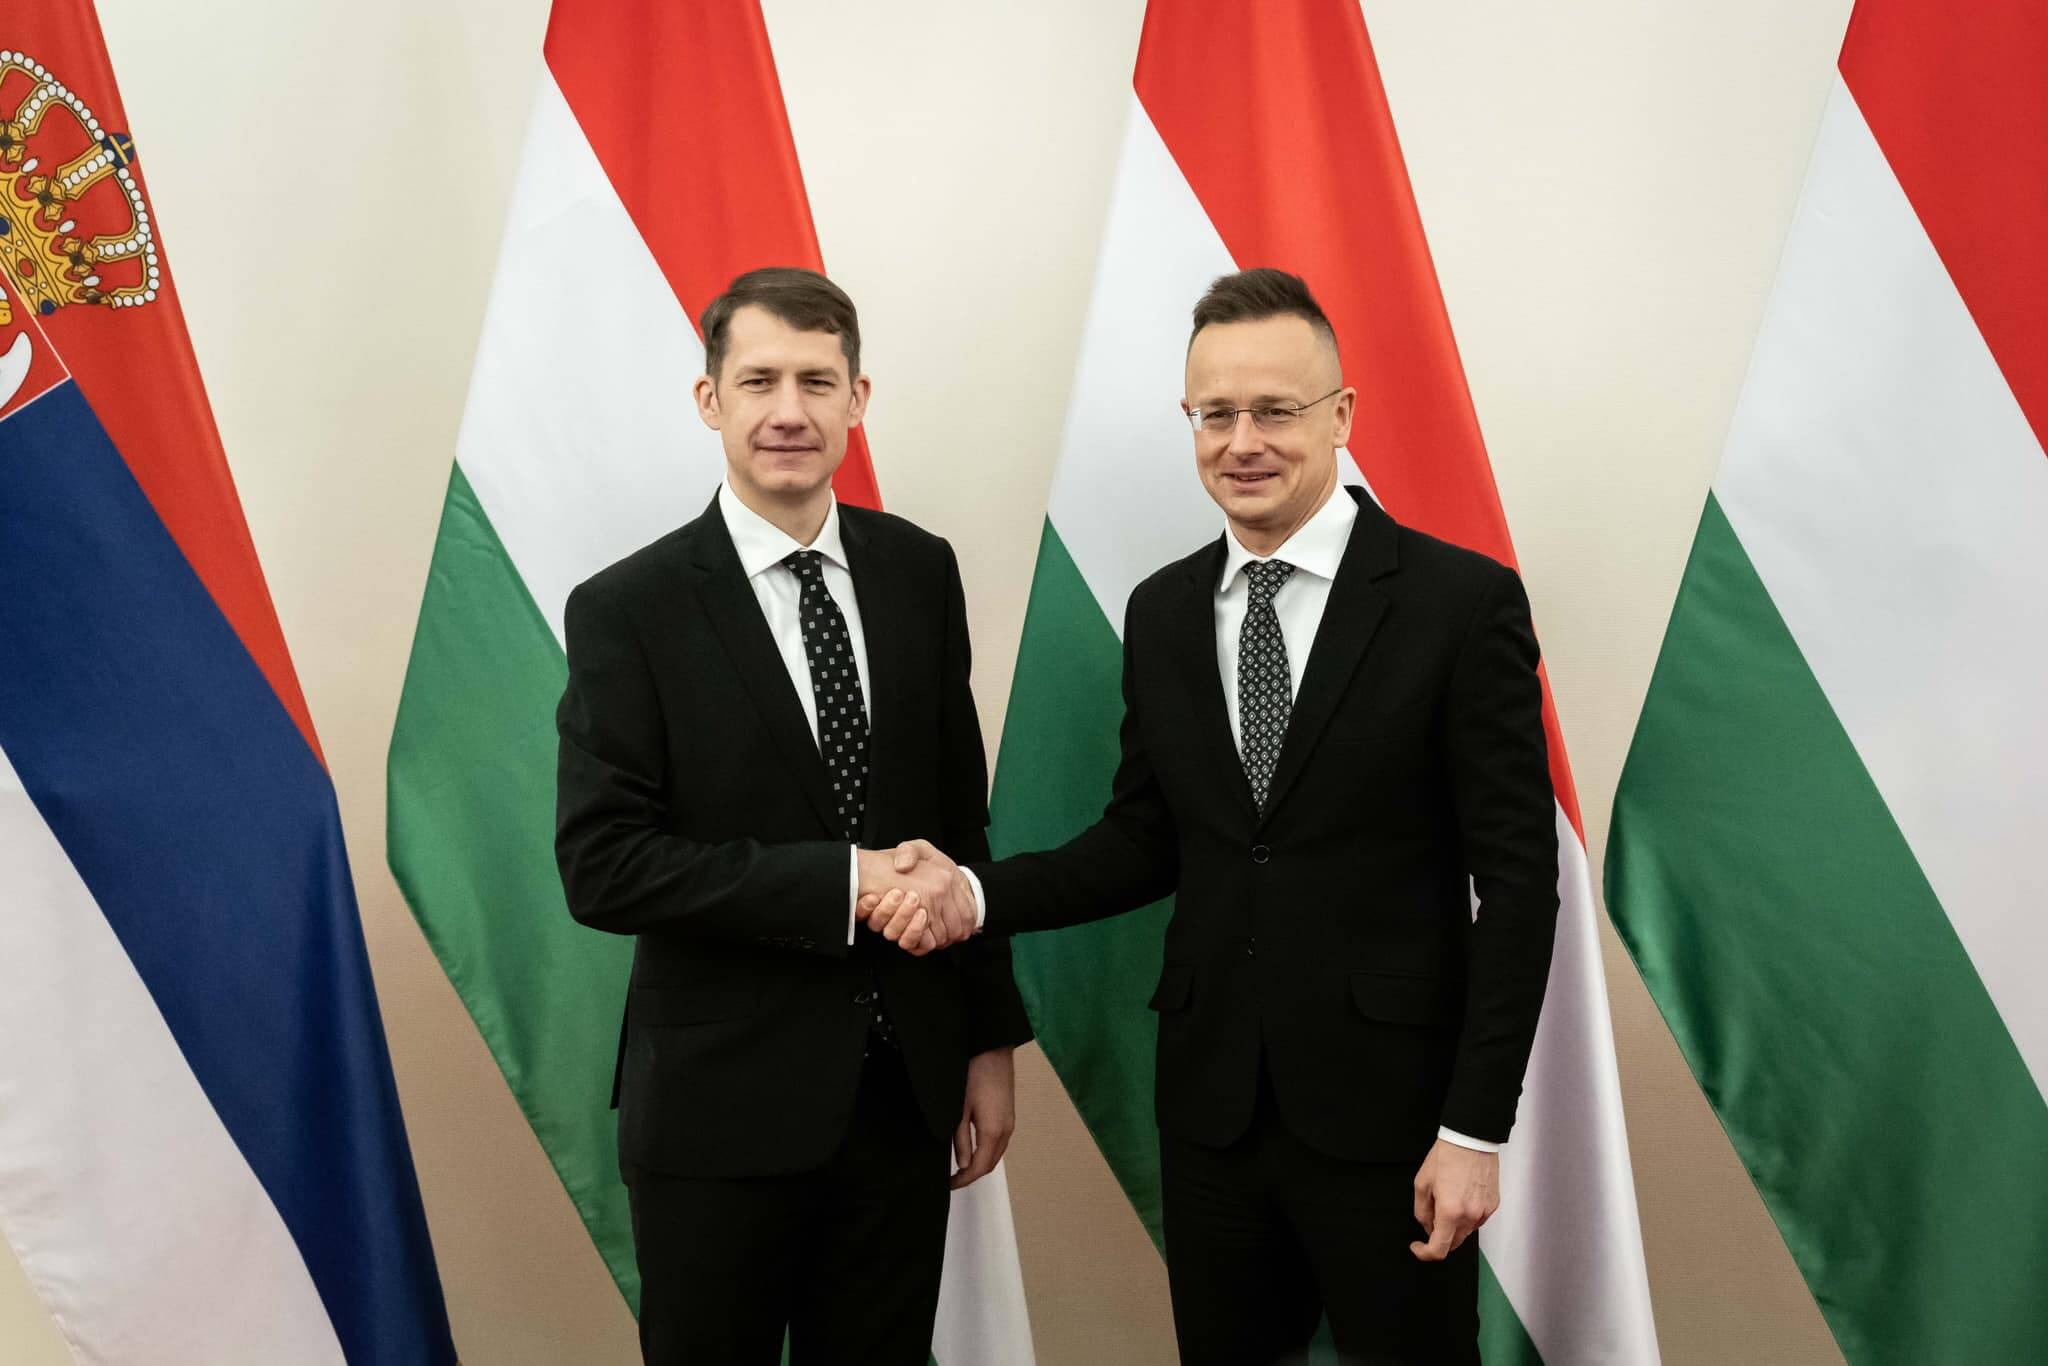 Hungary-Serbia Relations 'At Historic Best'